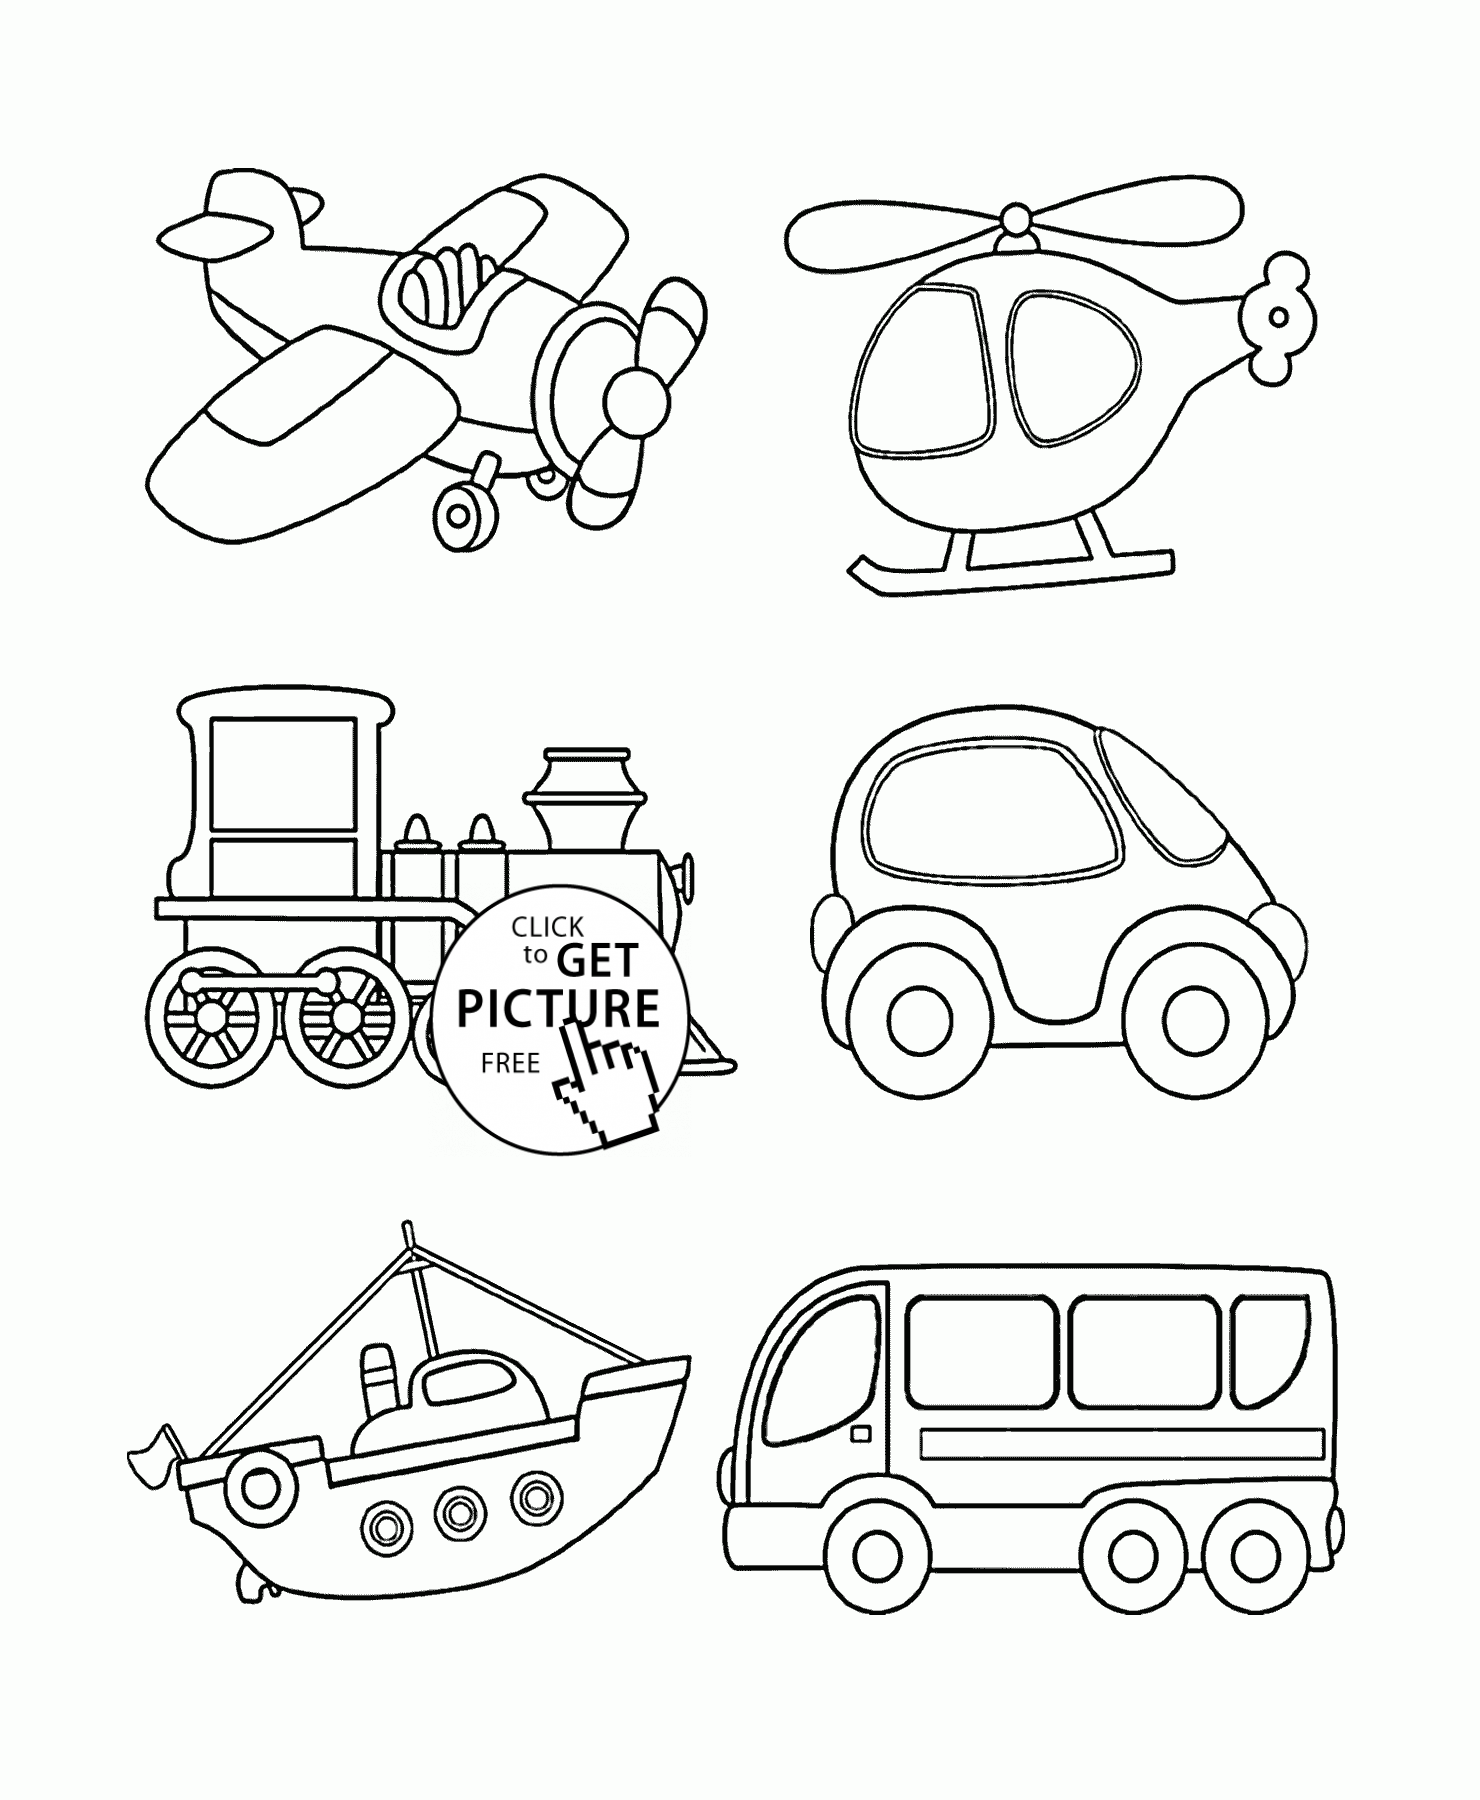 car coloring pages for preschoolers transportation coloring page for toddlers coloring pages car preschoolers for coloring pages 